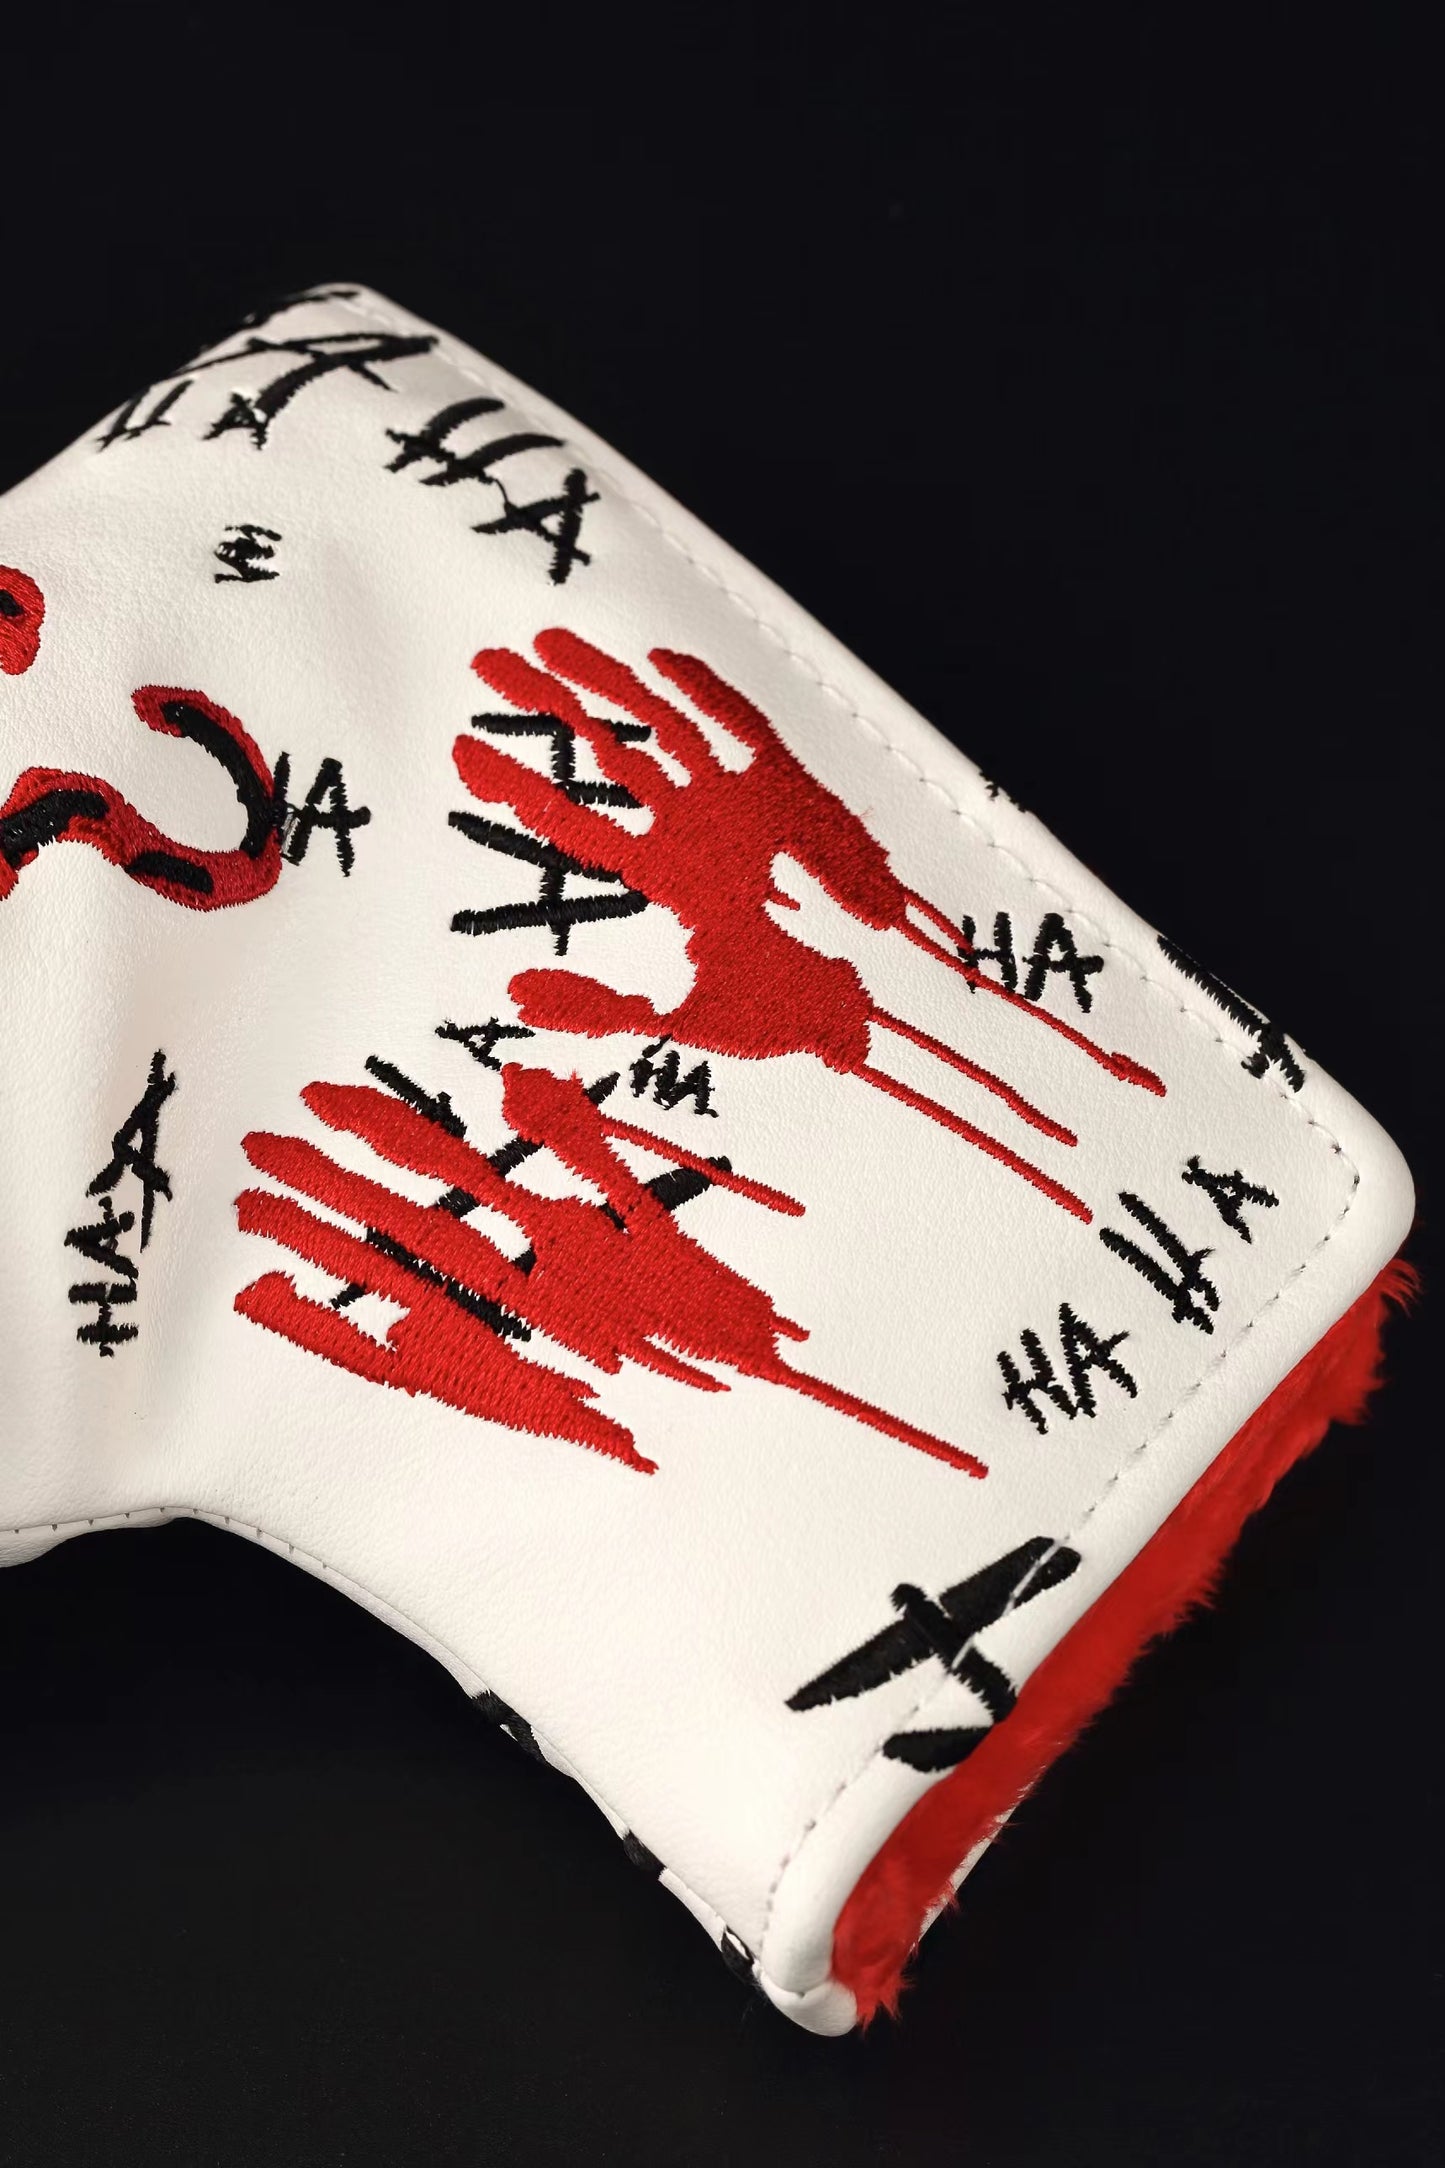 Upgraded Classic Joker Design Blade Putter Headcover by GOSH